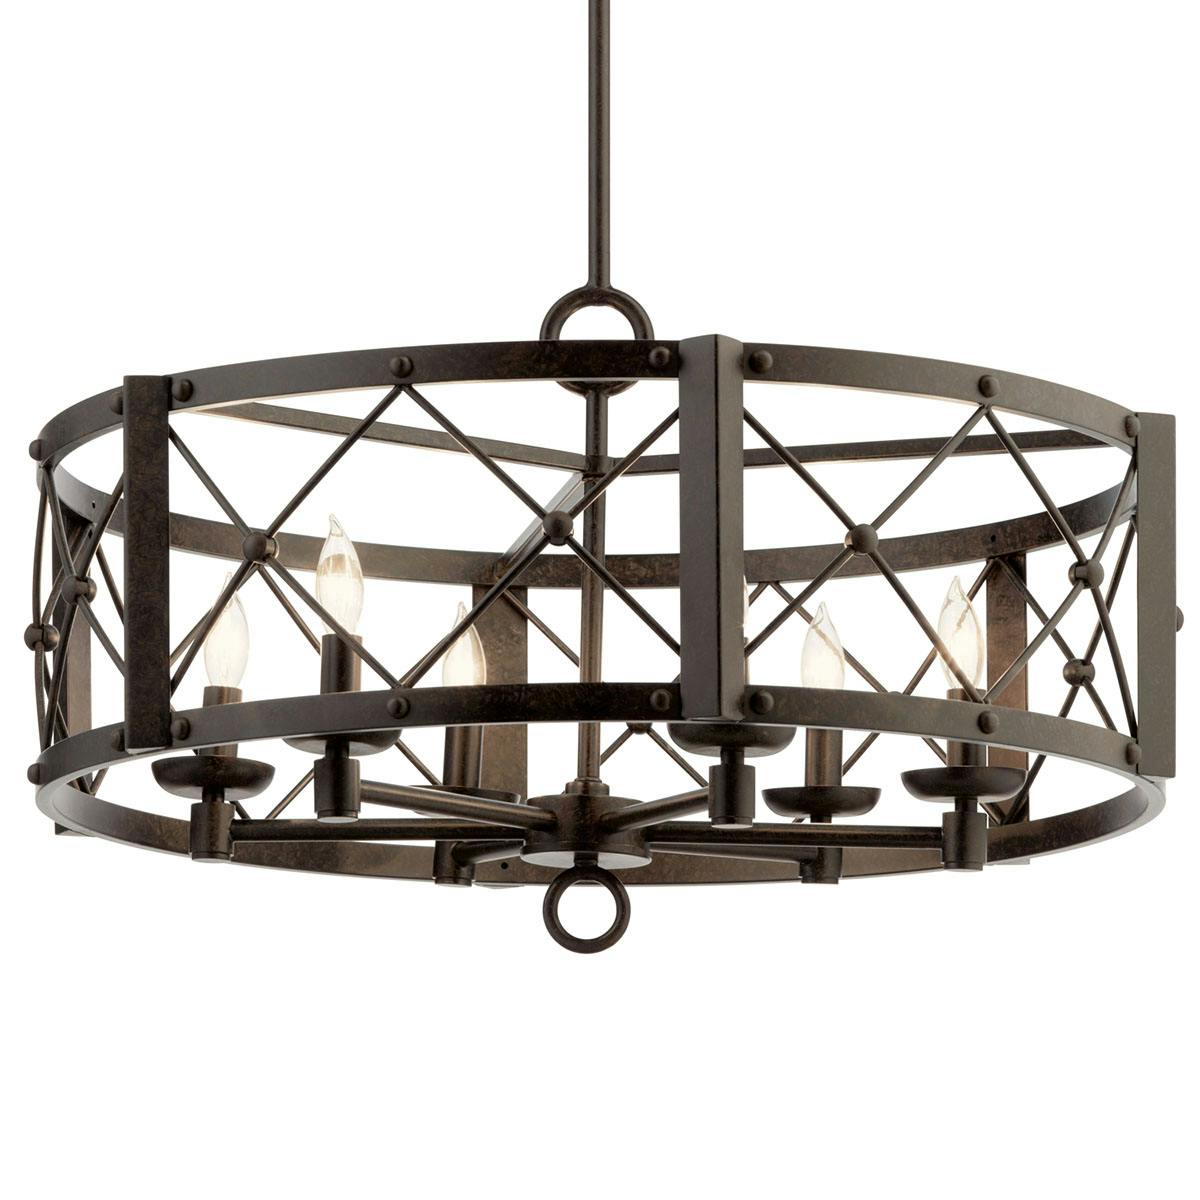 Arborwood 15" 6 Light Pendant with Bronze without the canopy on a white background